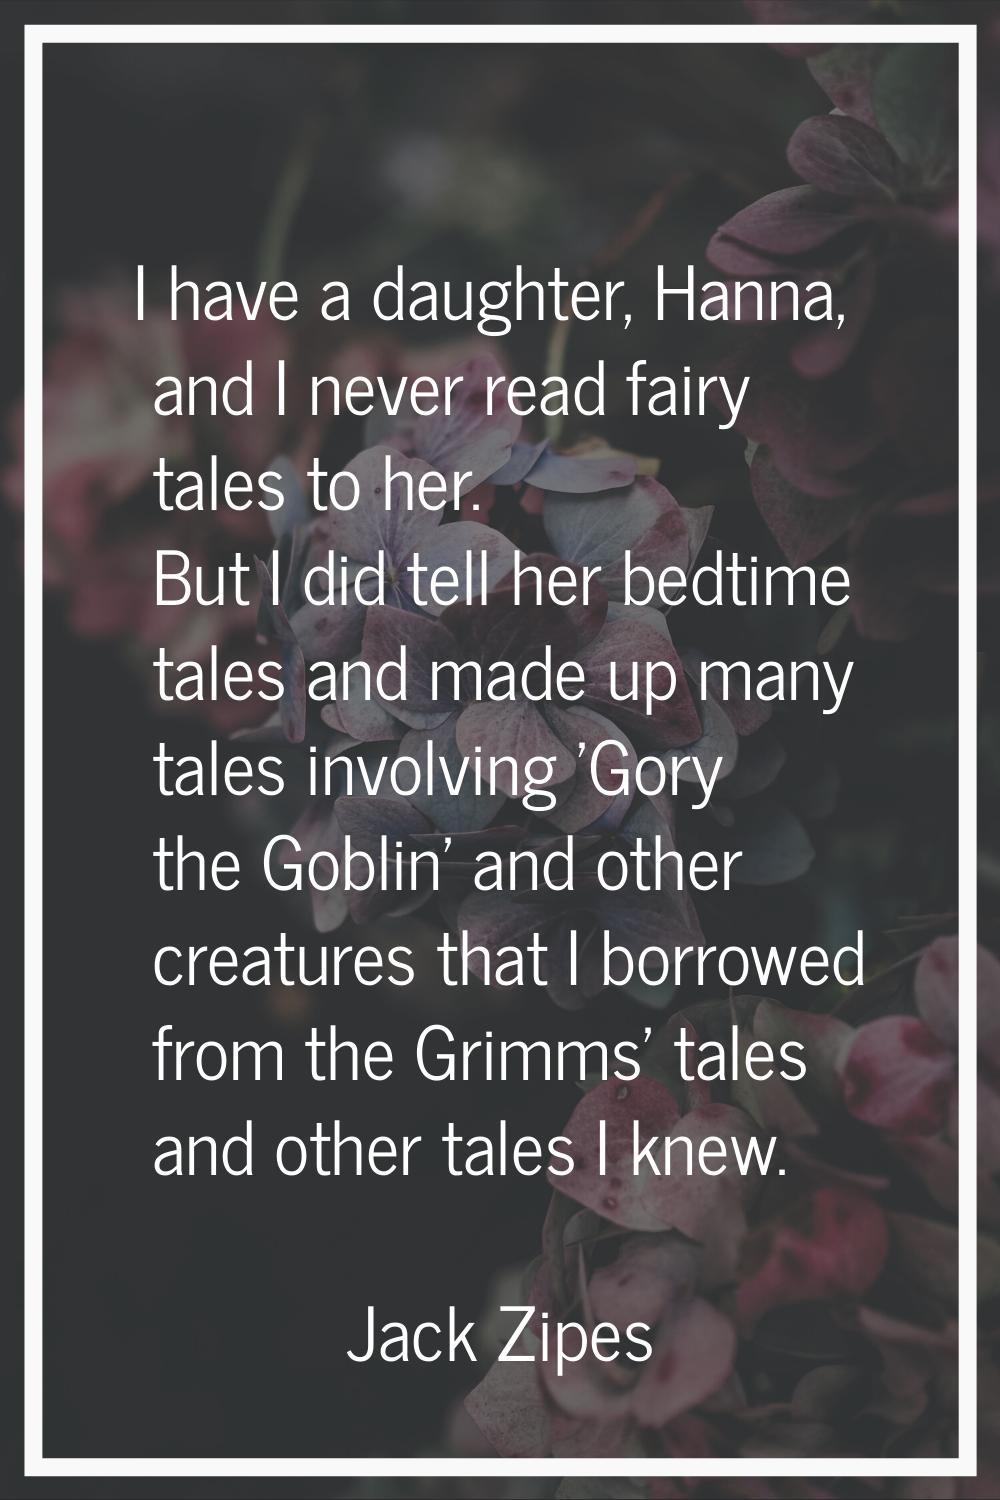 I have a daughter, Hanna, and I never read fairy tales to her. But I did tell her bedtime tales and